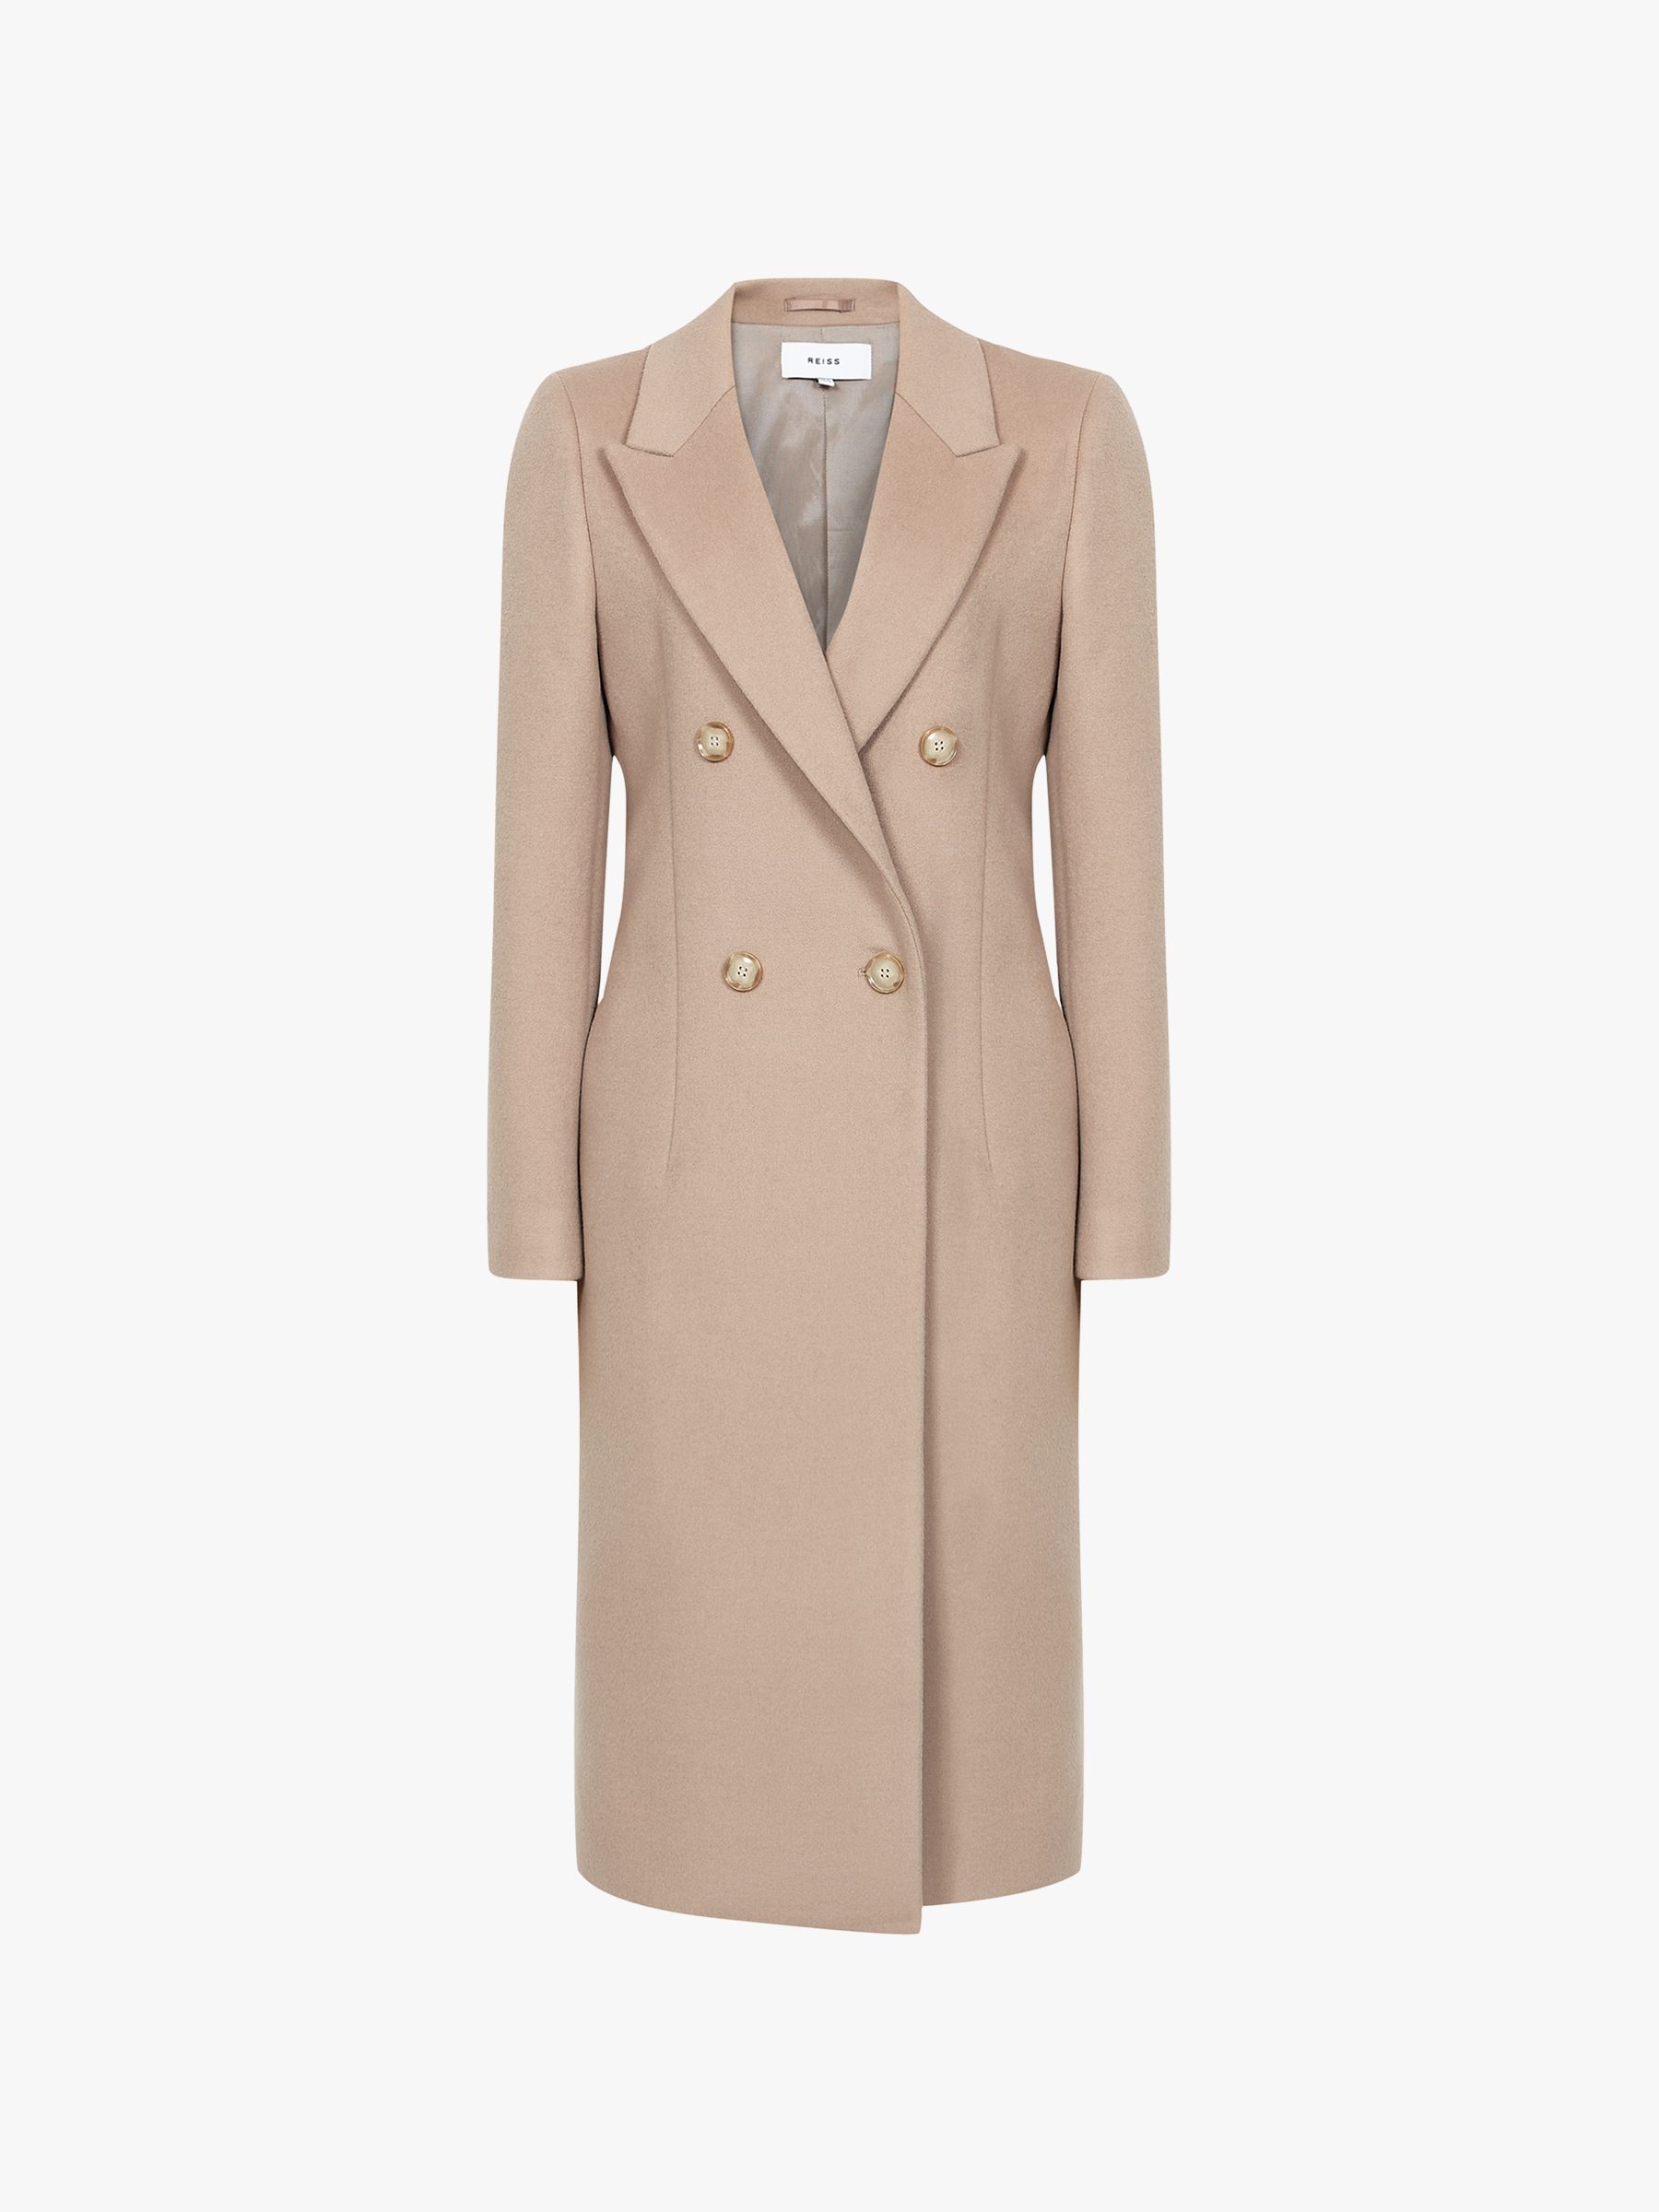 Reiss Heston Longline Double Breasted Coat, Camel at John Lewis & Partners